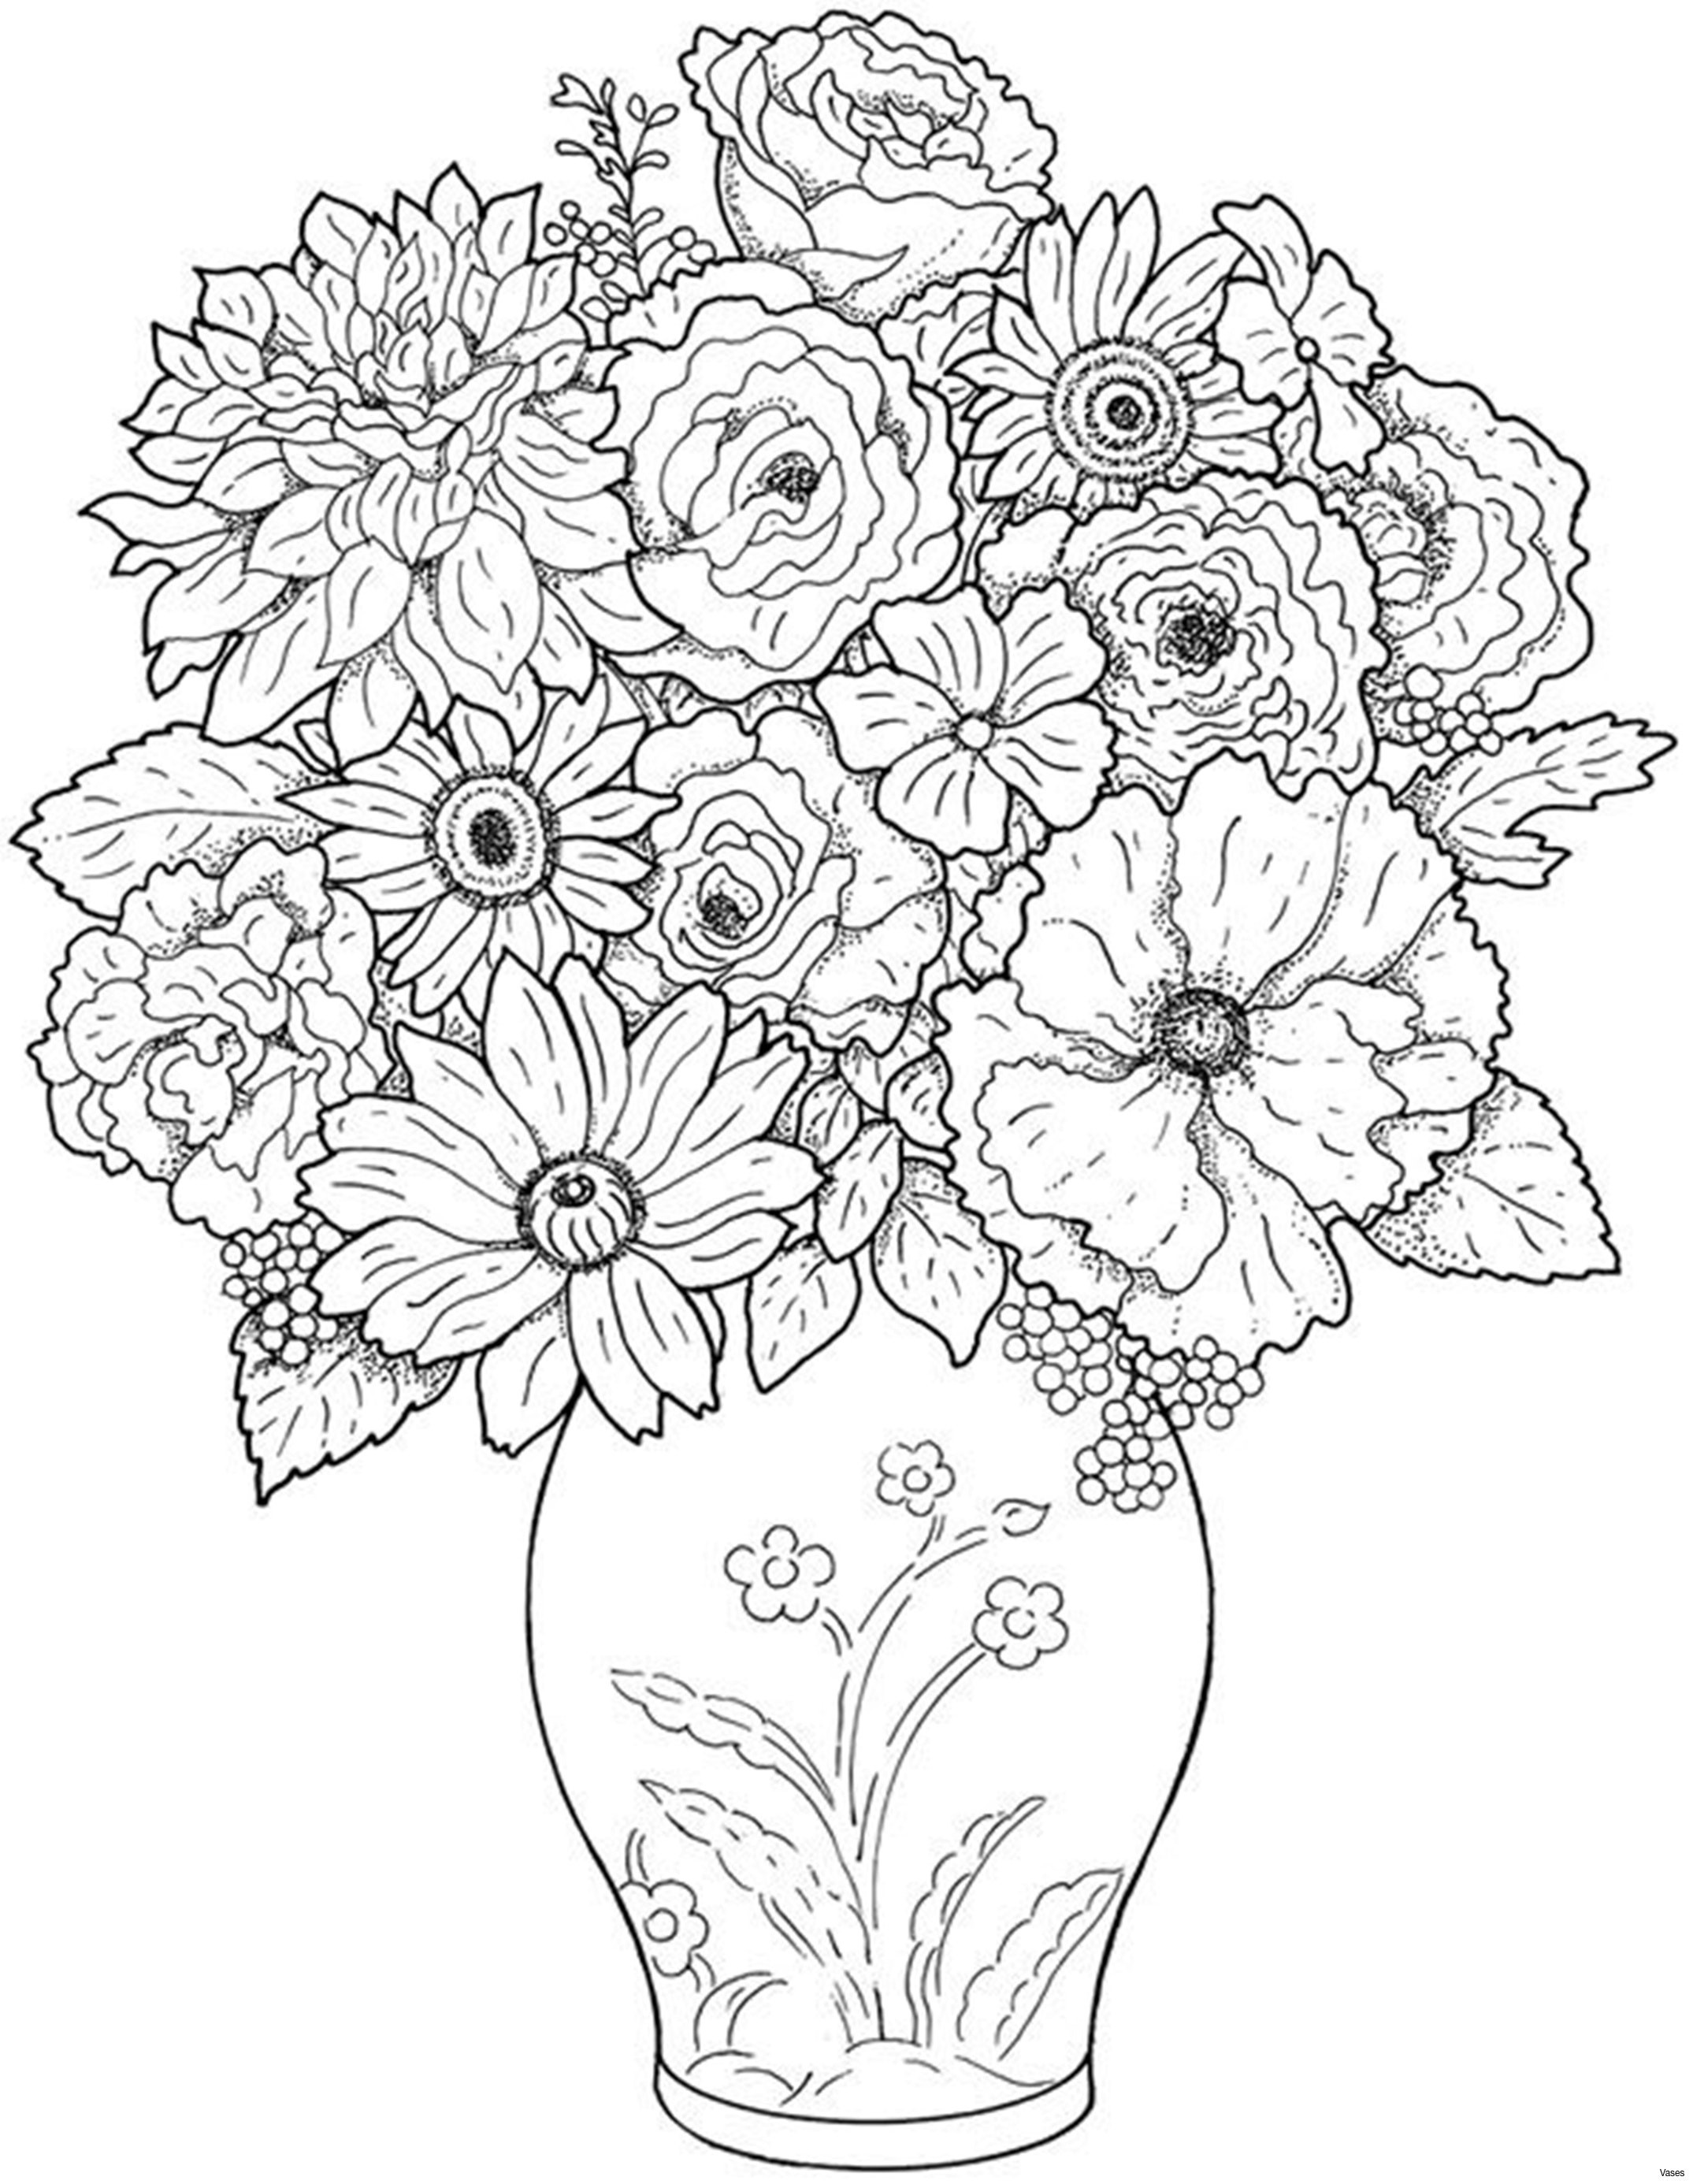 18 Trendy Yellow Rose Vase 2024 free download yellow rose vase of new gray flowers yepigames me regarding cool vases flower vase coloring page pages flowers in a top i 0d